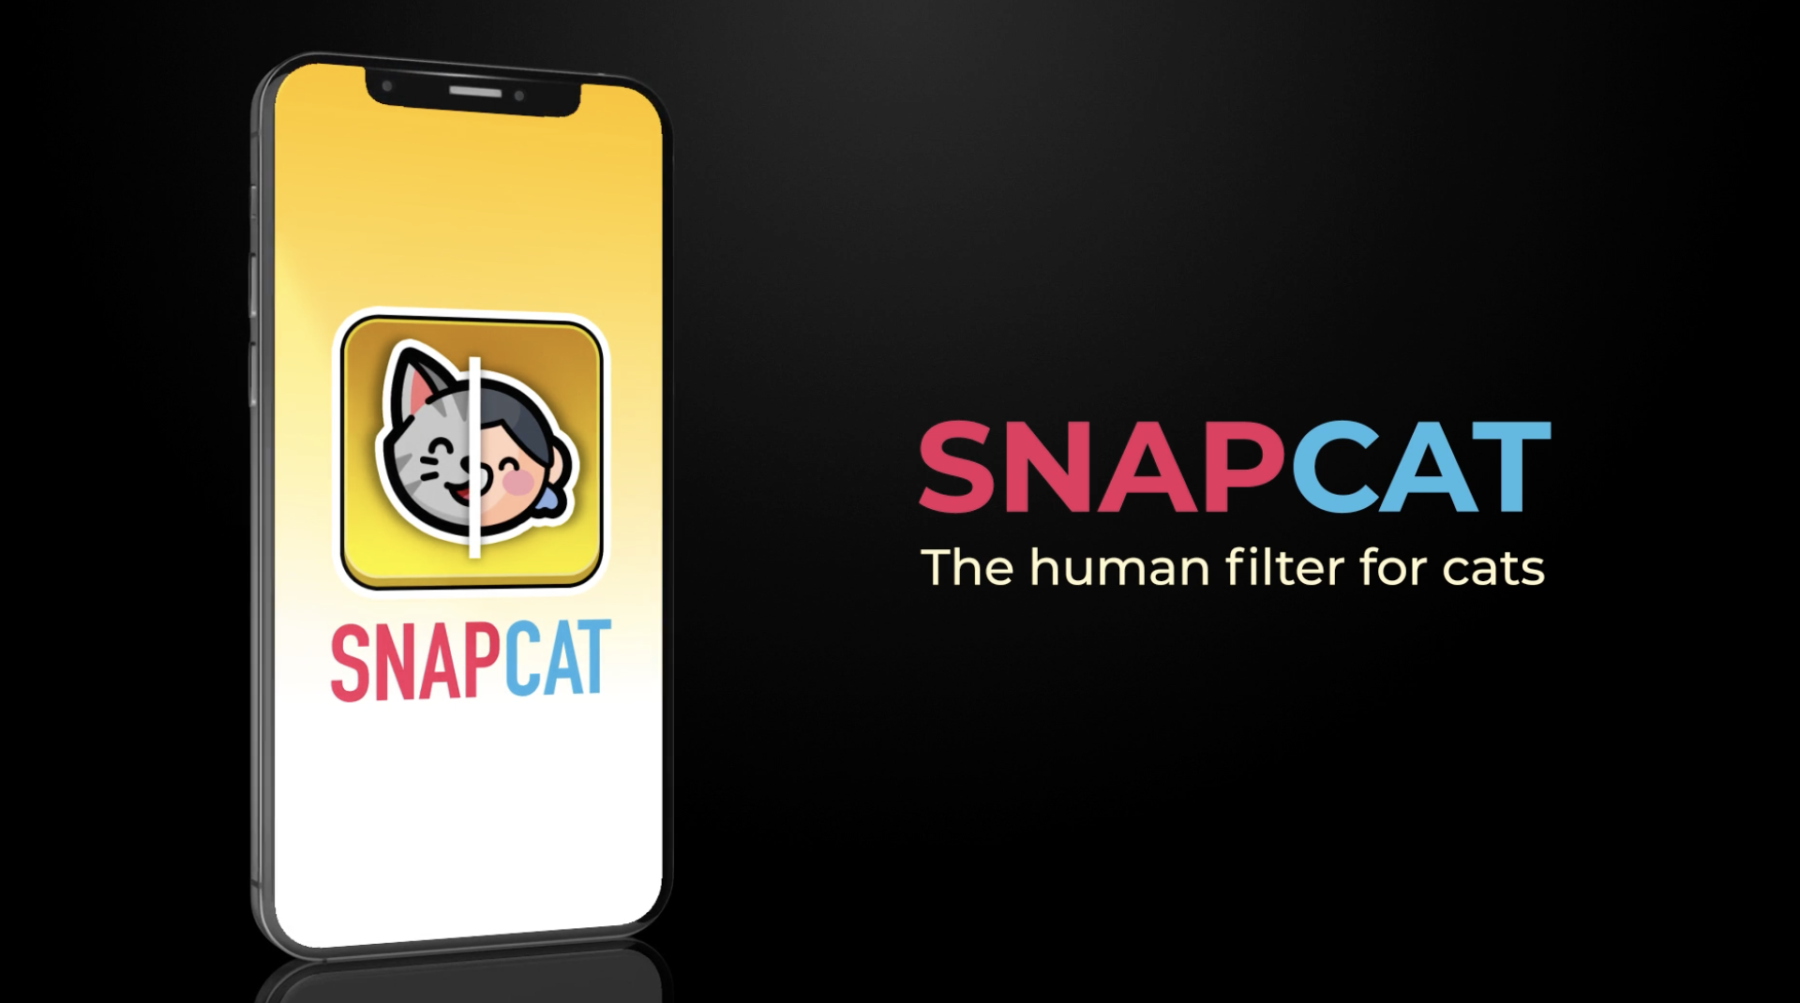 SnapCat: The Human Filter for Cats